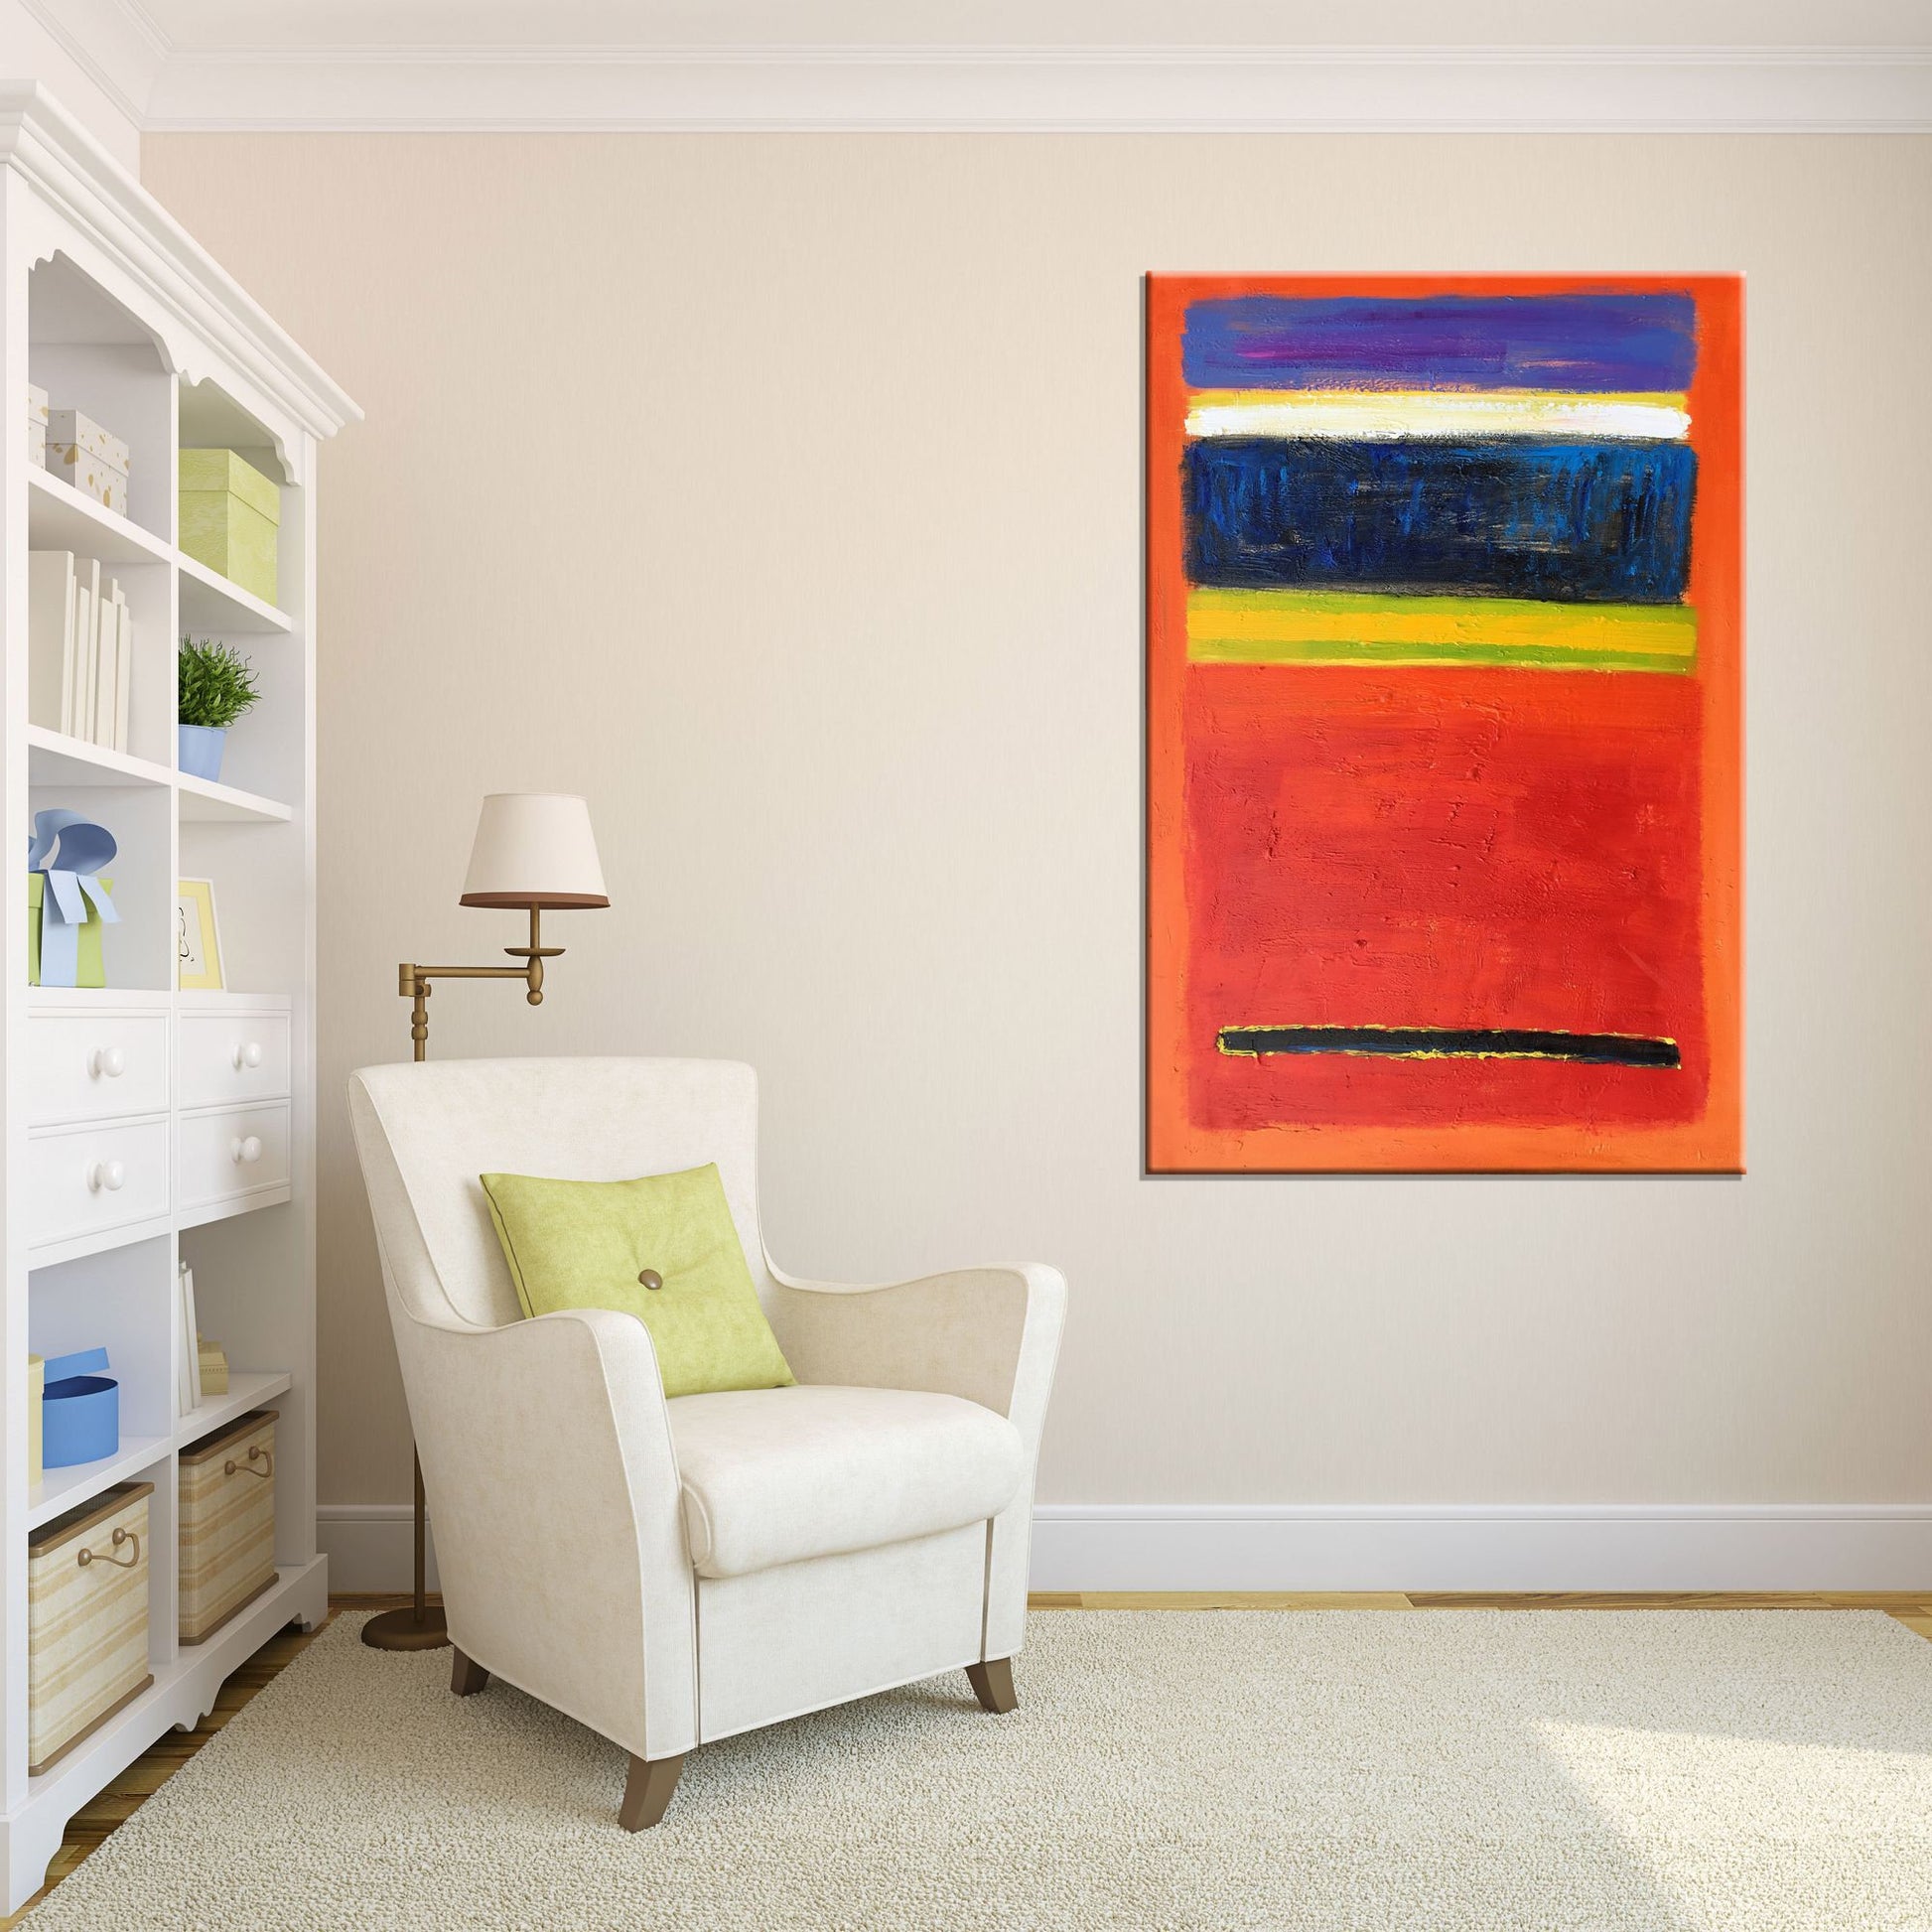 Large Abstract Oil Painting Orange Red, Mark Rothko, Abstract Canvas Art, Large Painting, Kitchen Wall Decor, Original Artwork, Modern Art